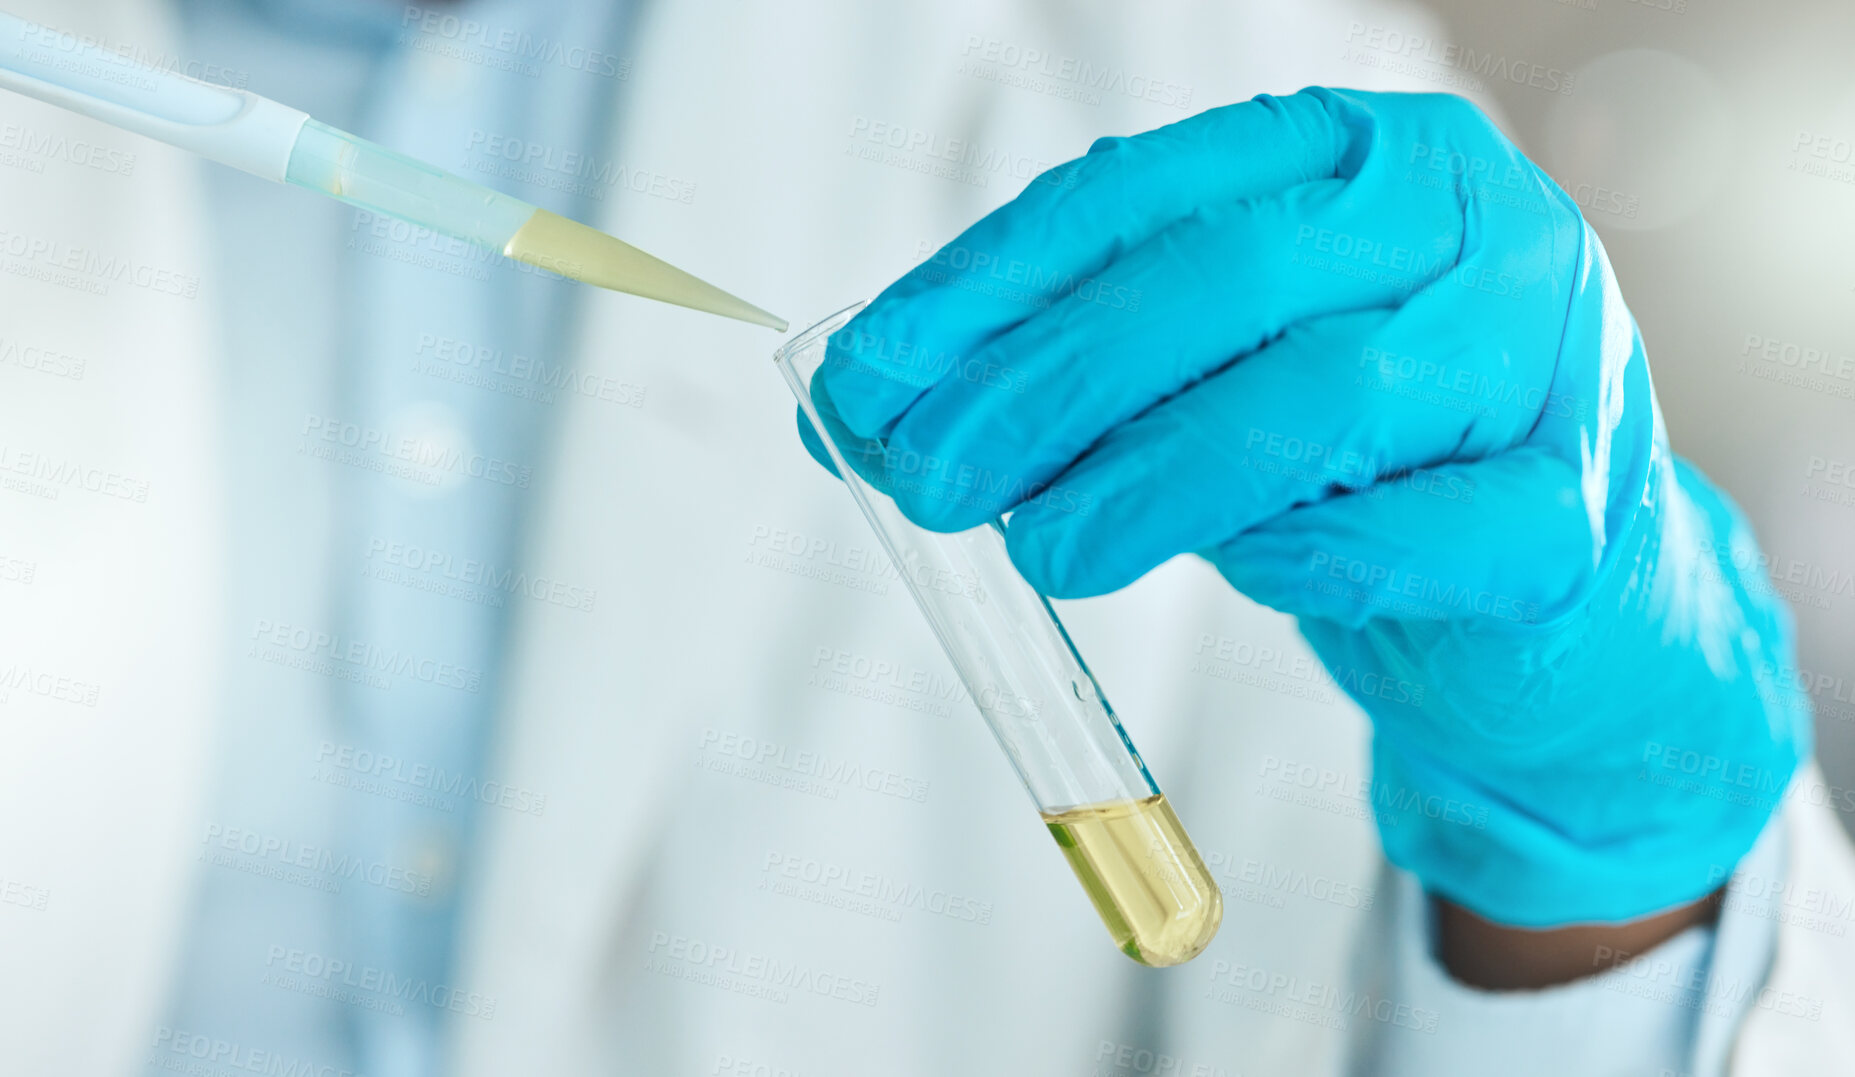 Buy stock photo Cropped shot of an unrecognisable scientist using a test tube and dropper in the laboratory